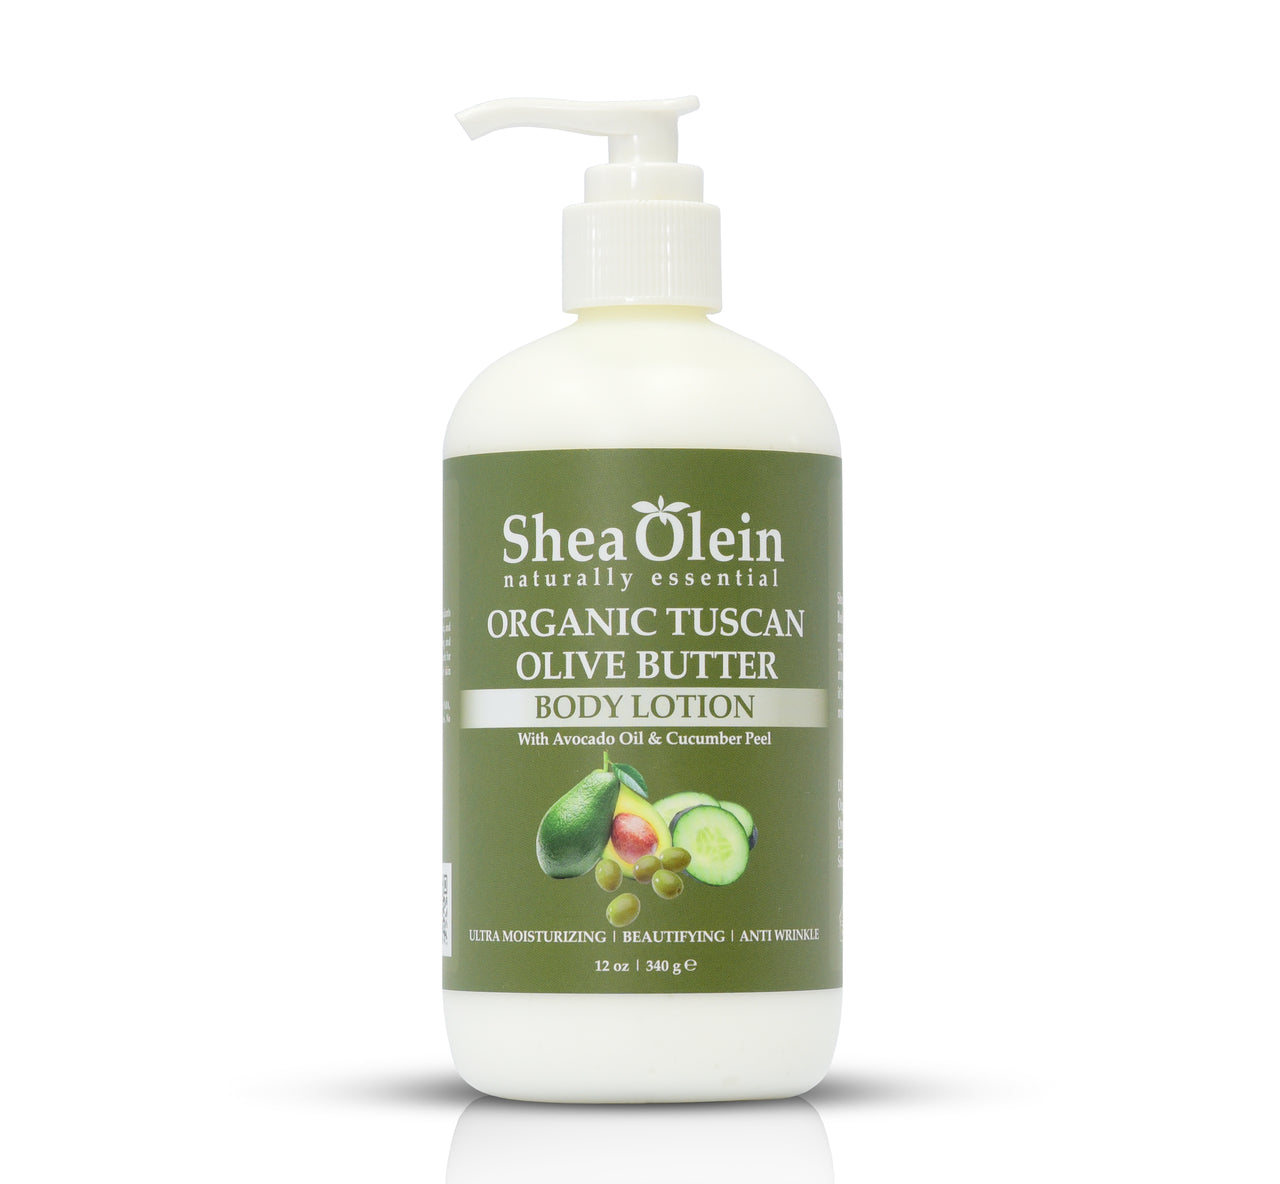 Organic Tuscan Olive Butter Body Lotion with Avocado Oil & Cucumber Peel 12oz